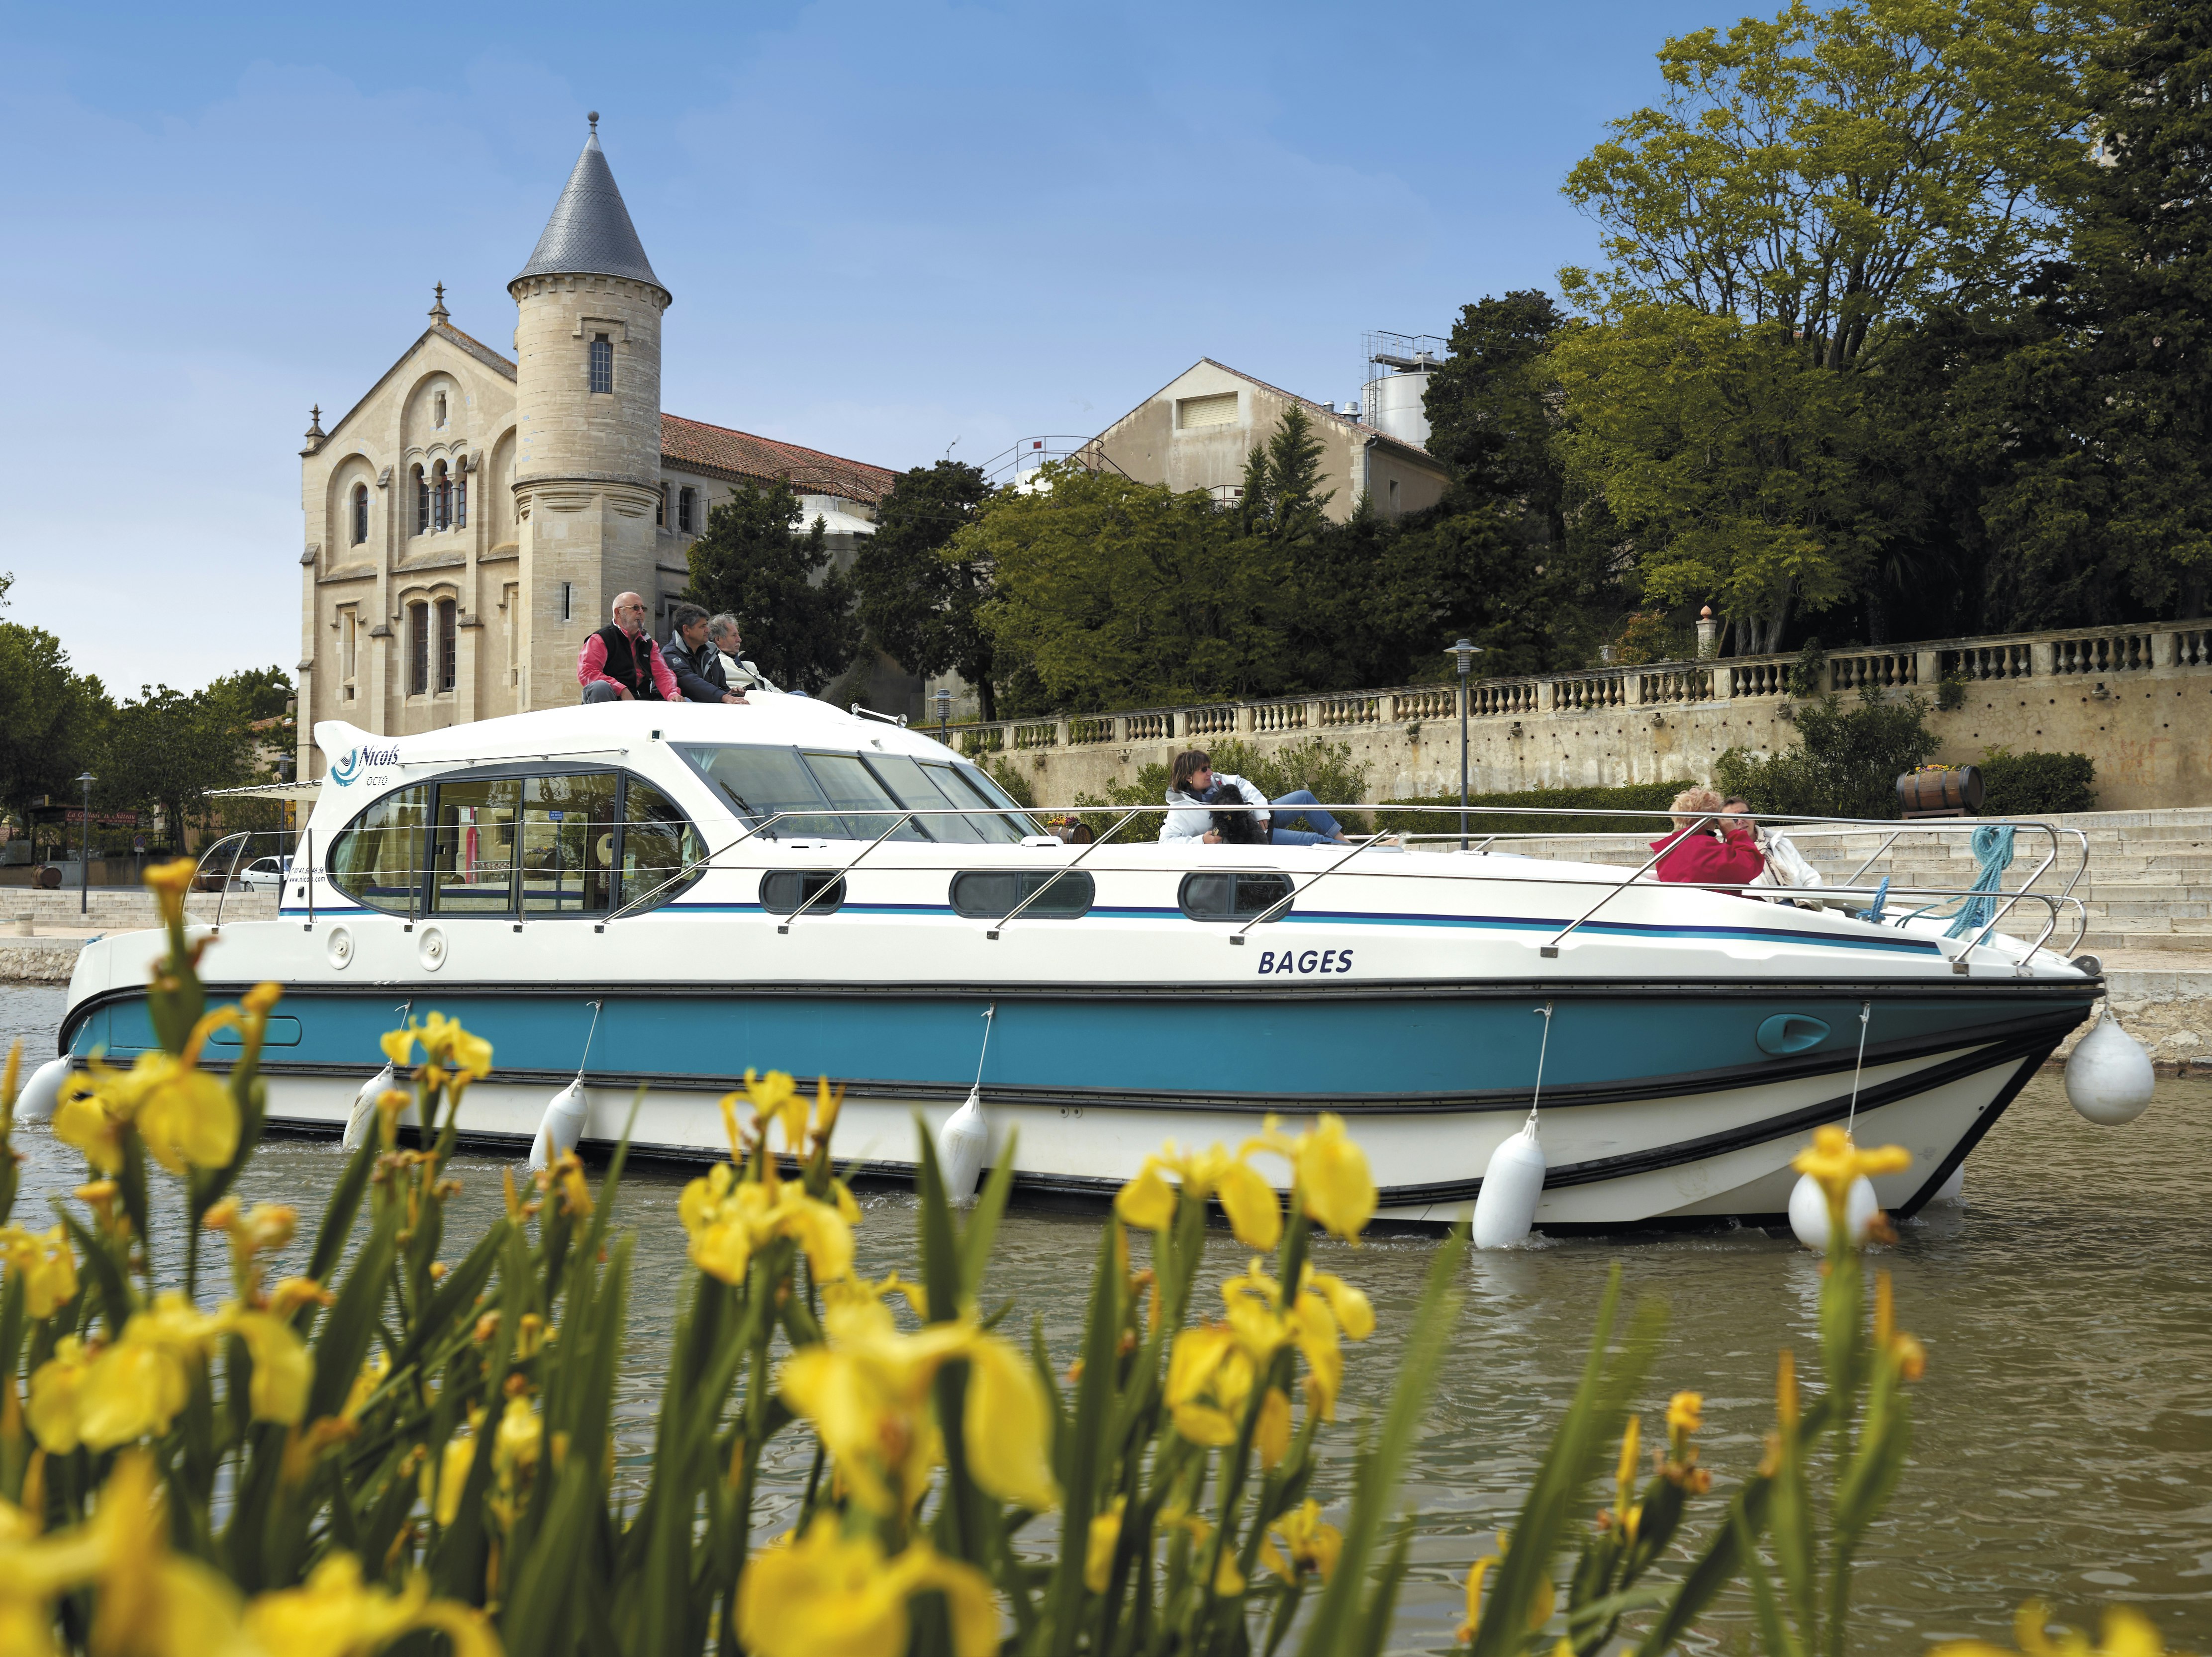 A houseboat sails past a historic castle in France.